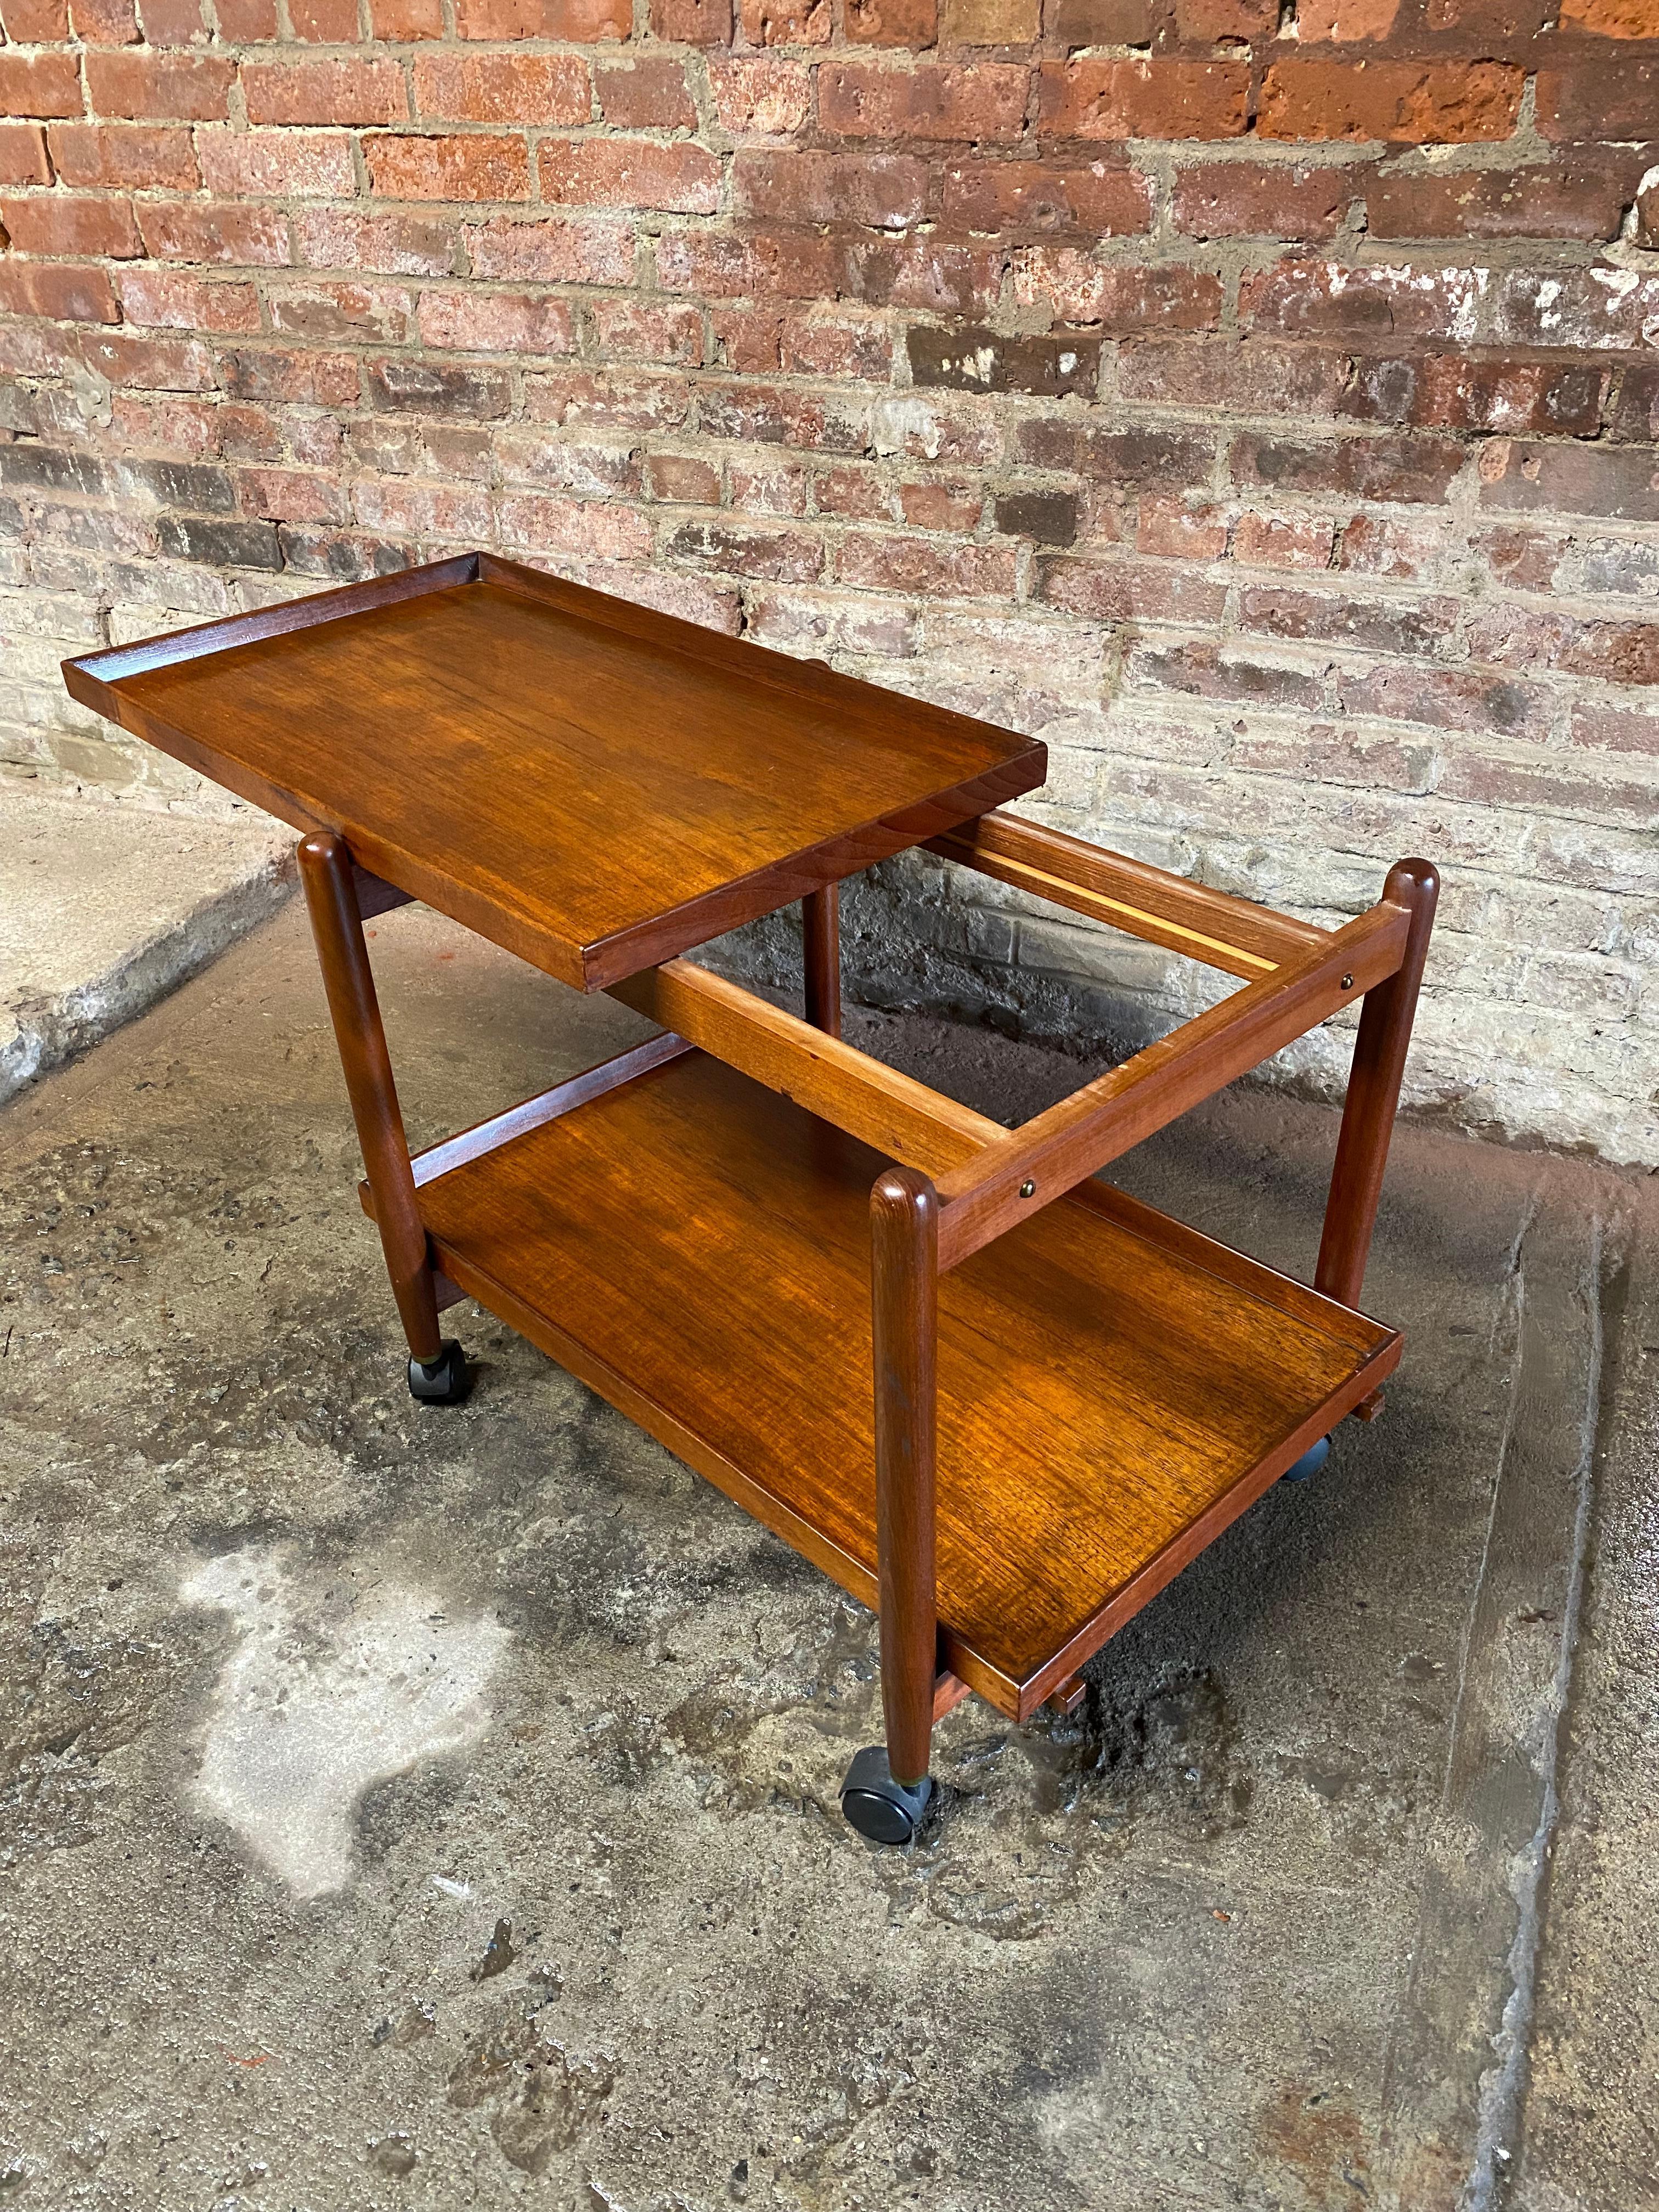 Poul Hundevad Teak rolling cart. The bottom tray lifts off and the top tray slides to make a larger display or storage area. Good practical Scandinavian ingenuity and design. Danish Control tag. 

Good overall condition with darkened oiled finish.